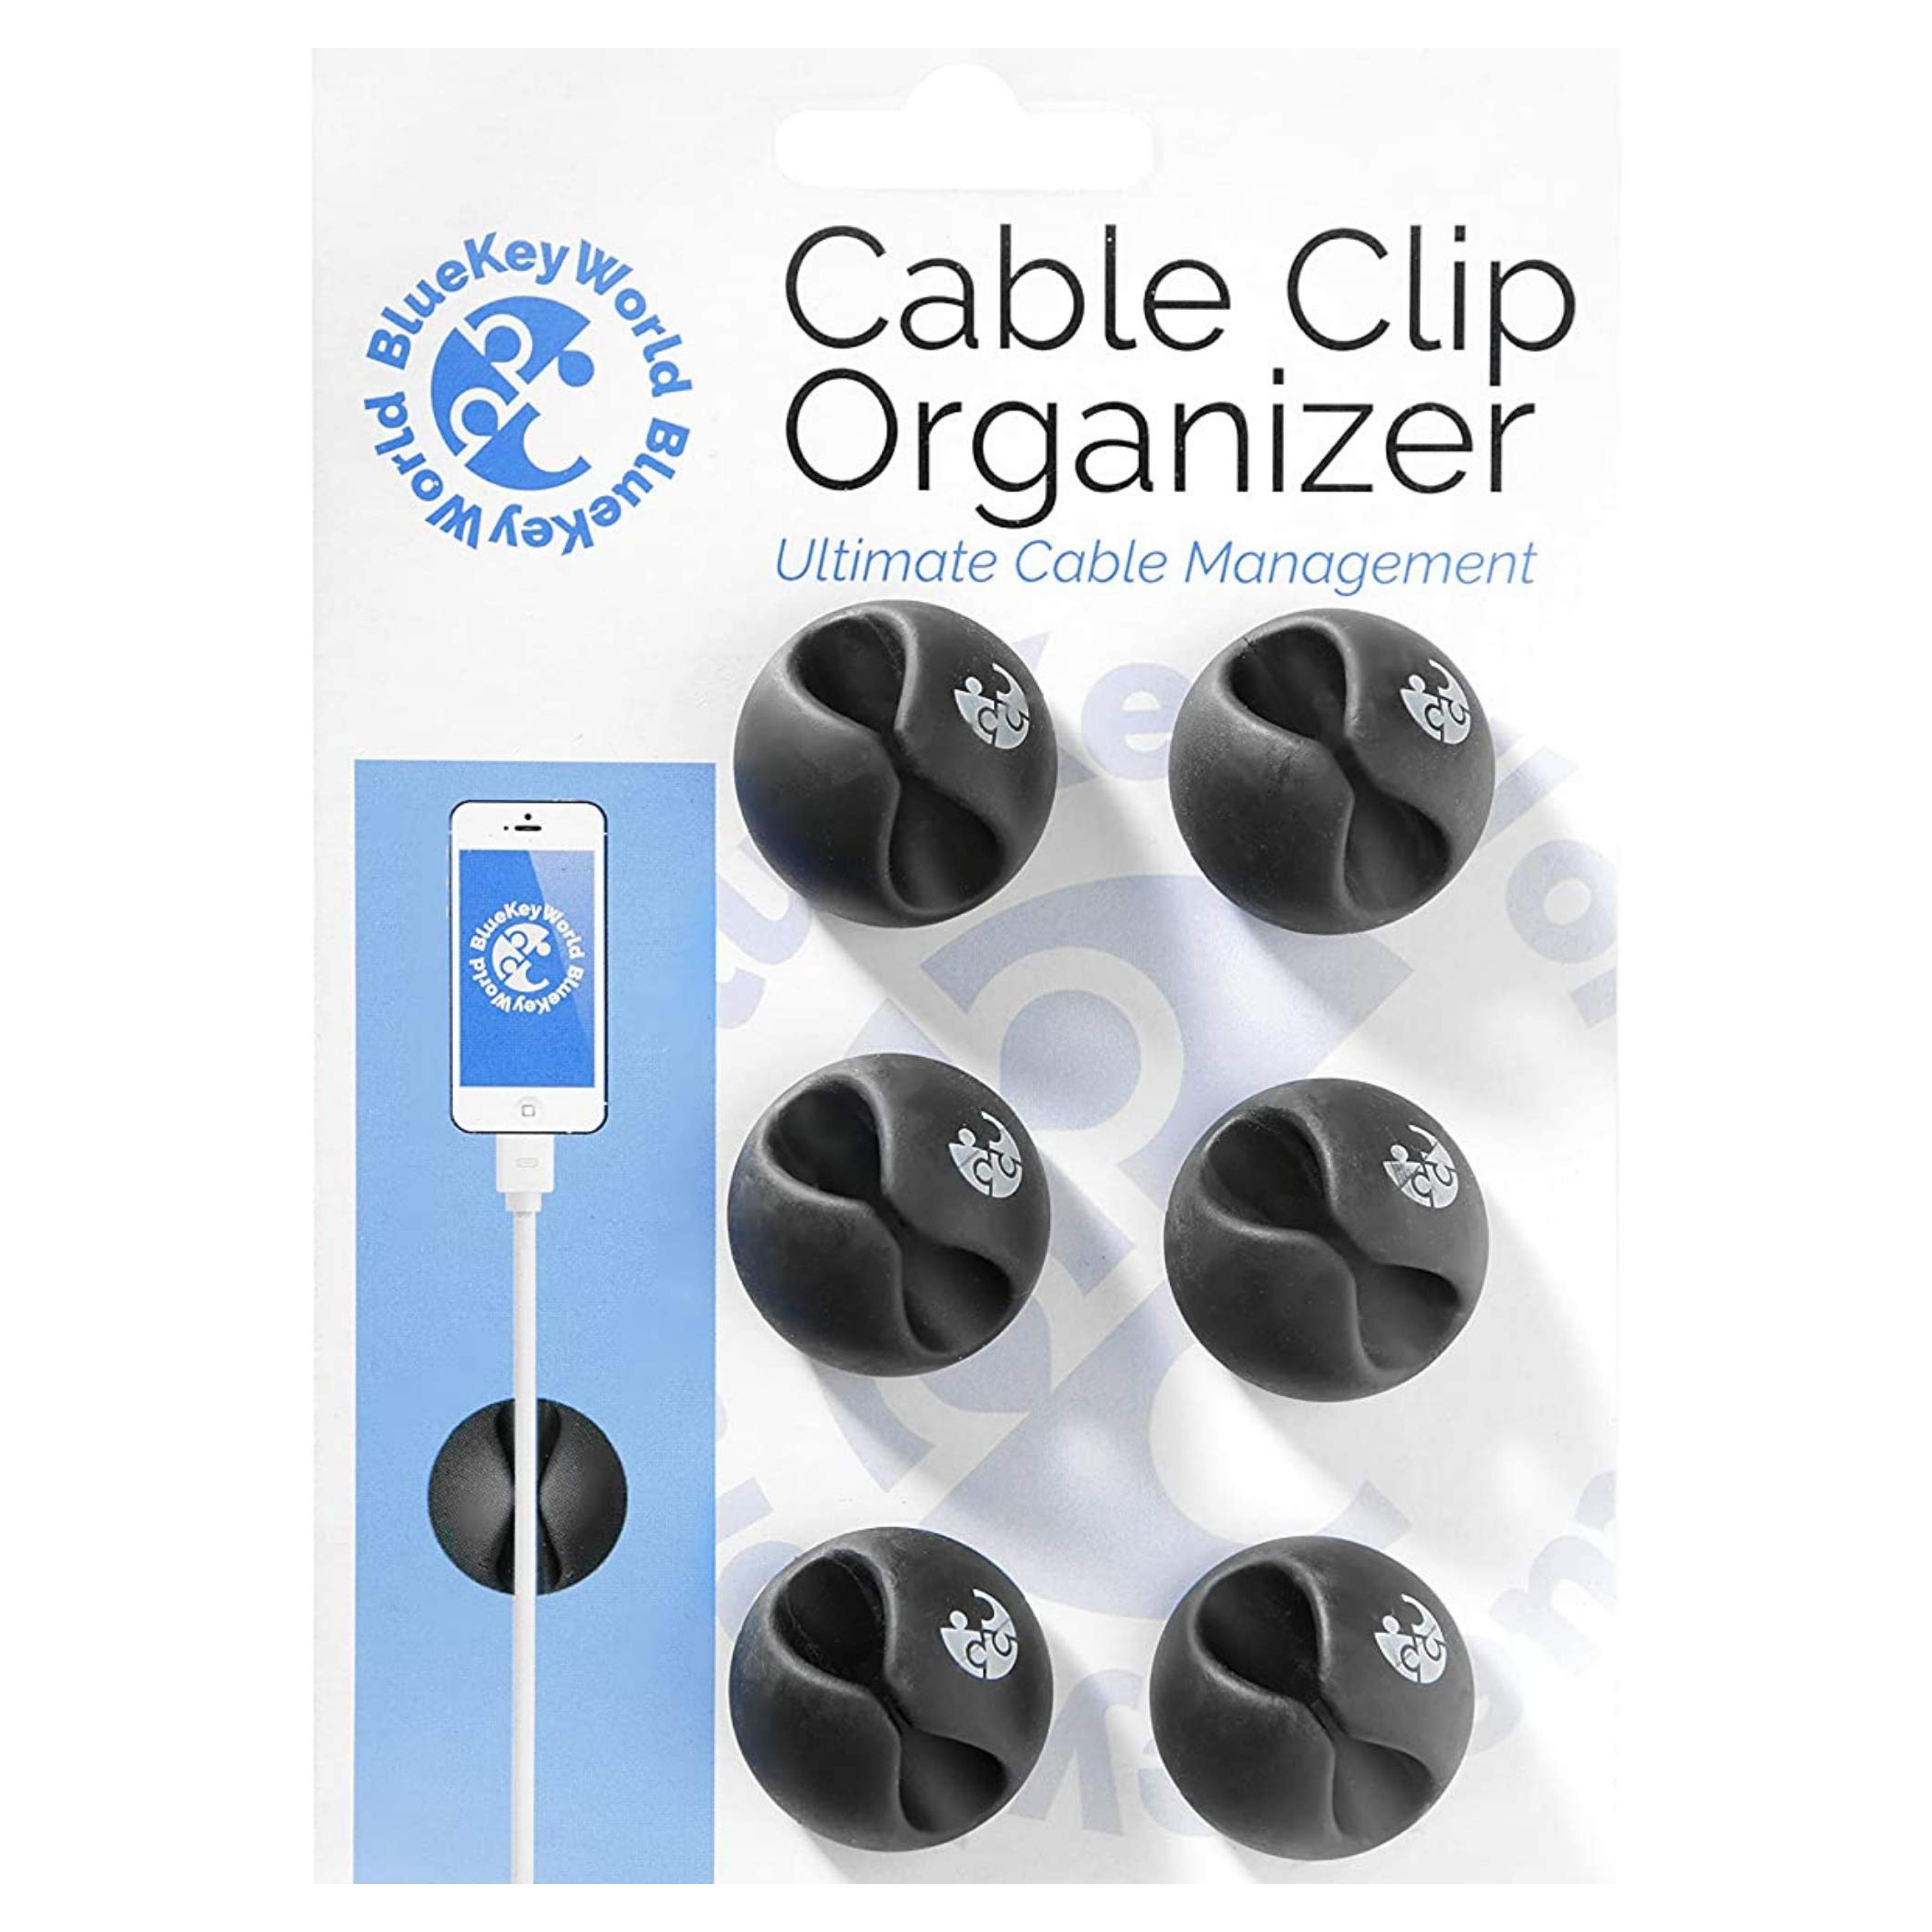 6 Pack Blue Key World Cable Clips - Cord Organizer - Desk Cable Management - Wire Holder System - Adhesive Cord Clips - Home, Office, Cubicle, Car, Nightstand, Desk Accessories - Gift Idea - Black